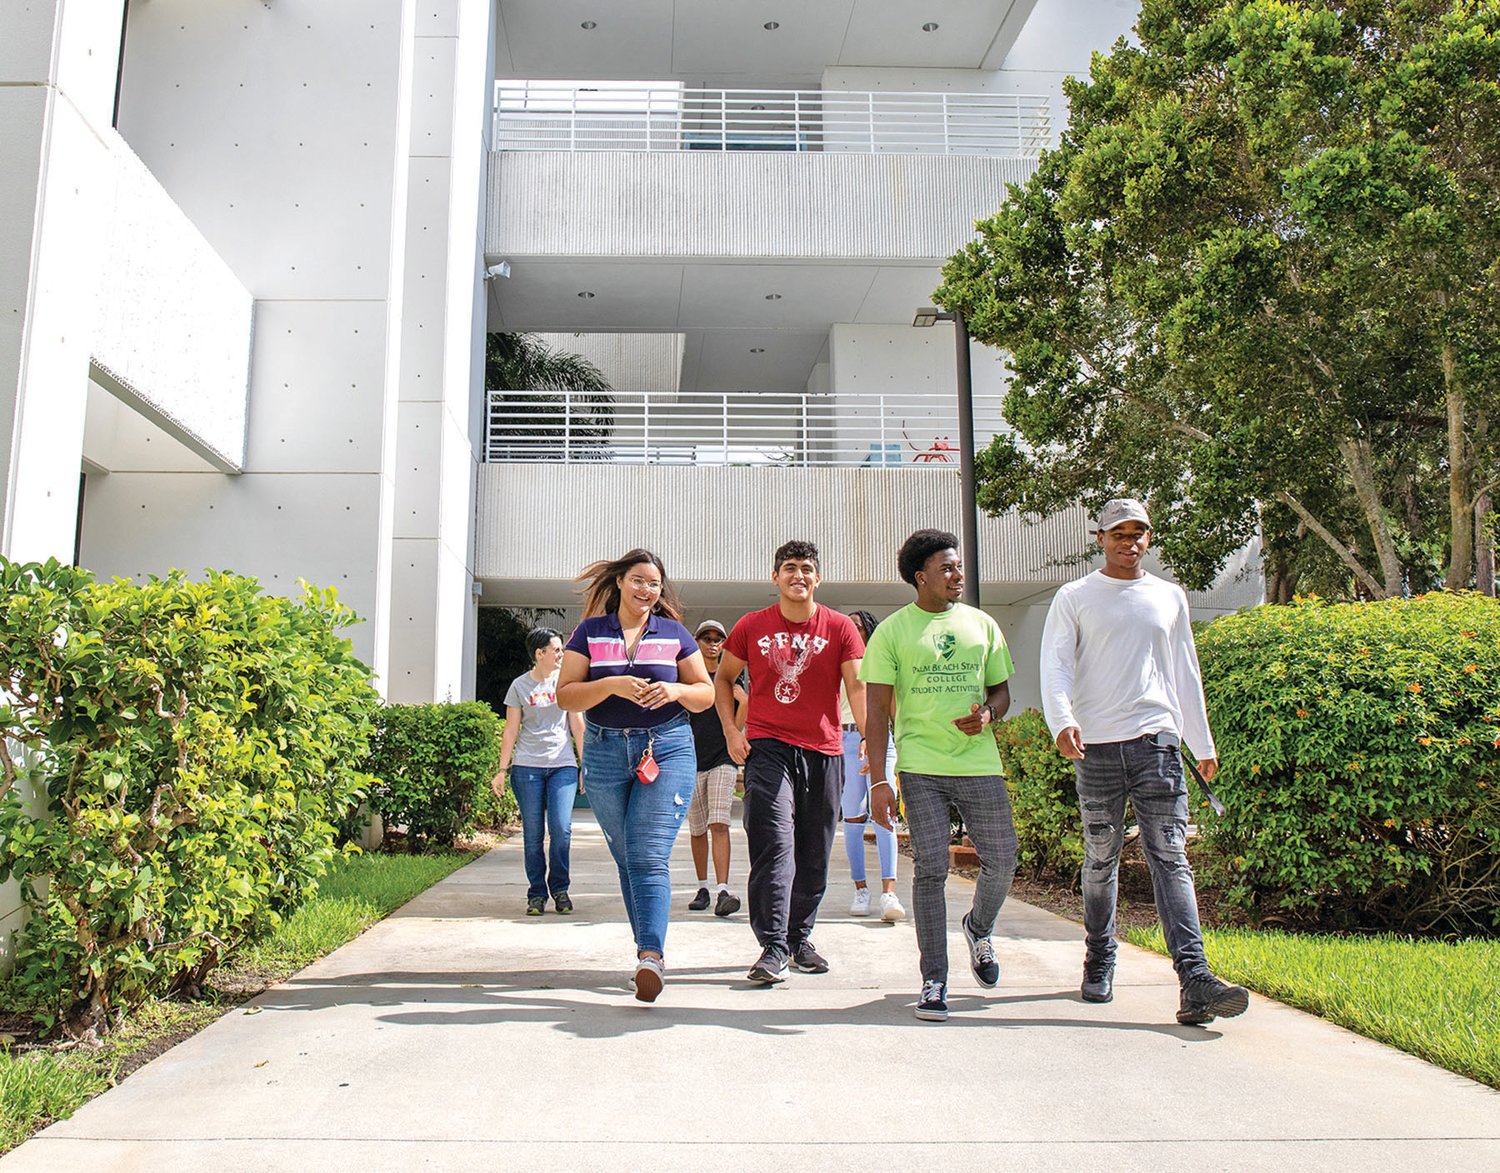 Palm Beach State College’s fall enrollment is up 6% this fall term compared to the previous year.